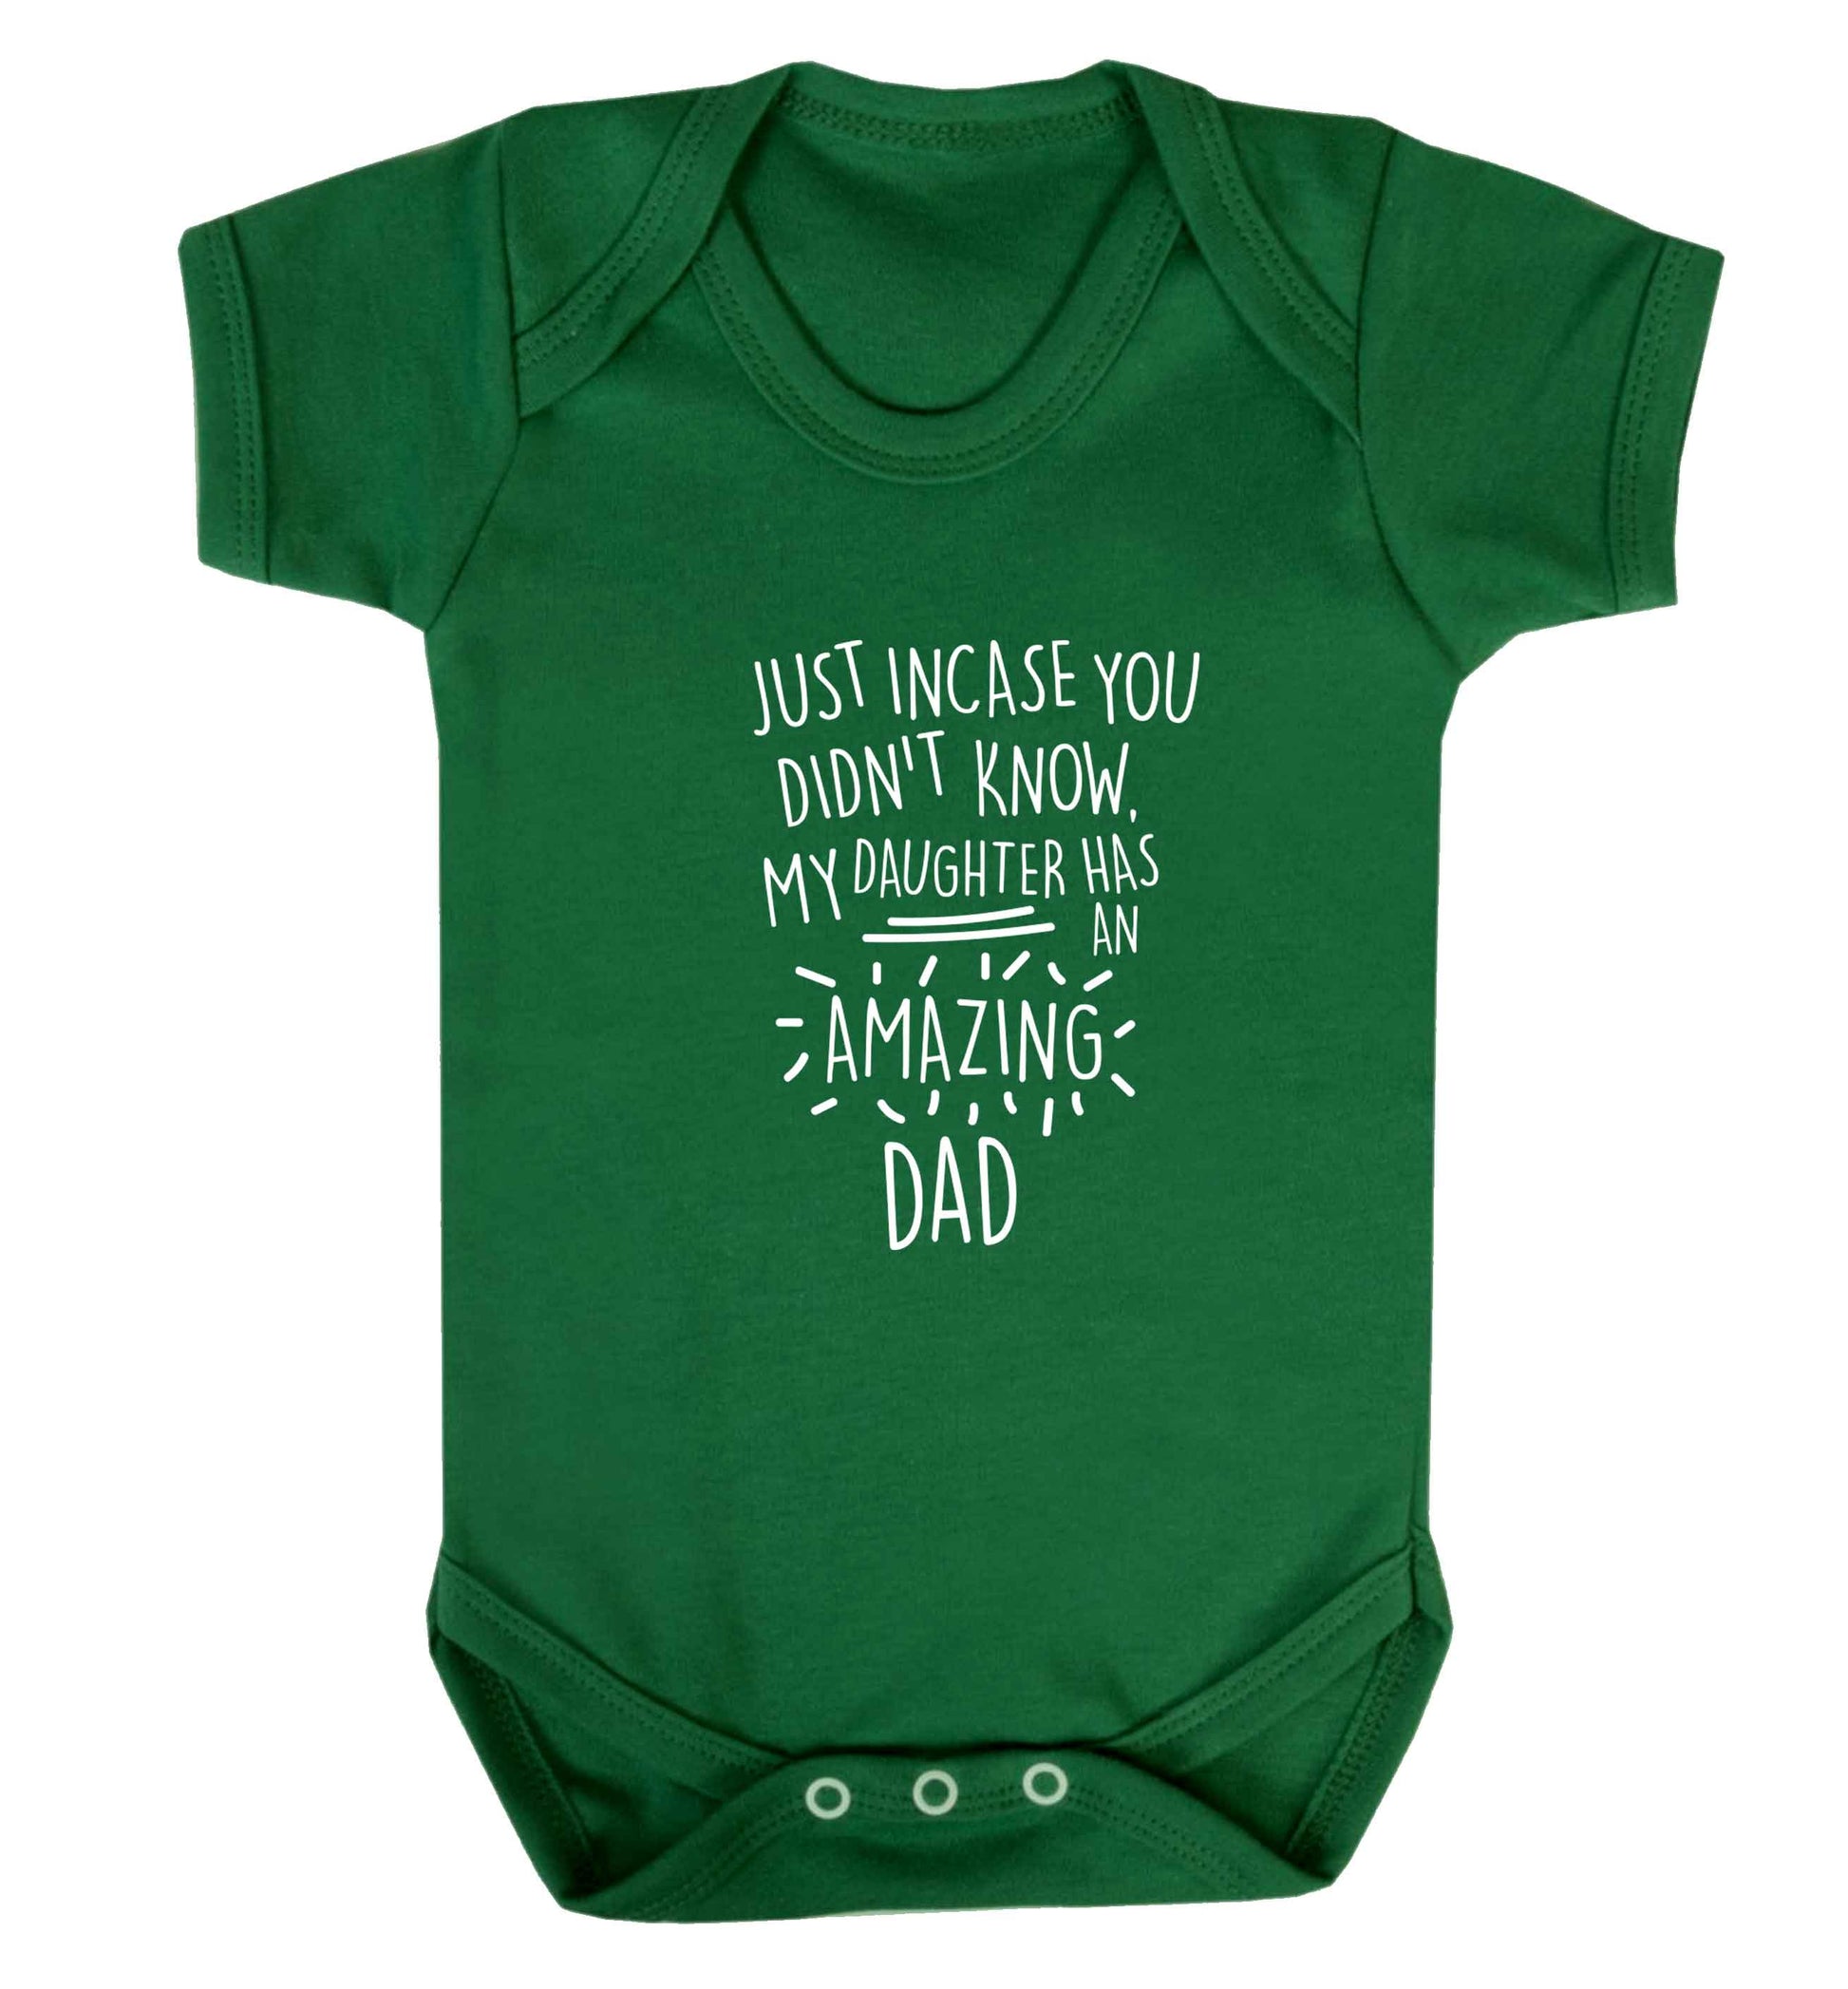 Just incase you didn't know my daughter has an amazing dad baby vest green 18-24 months